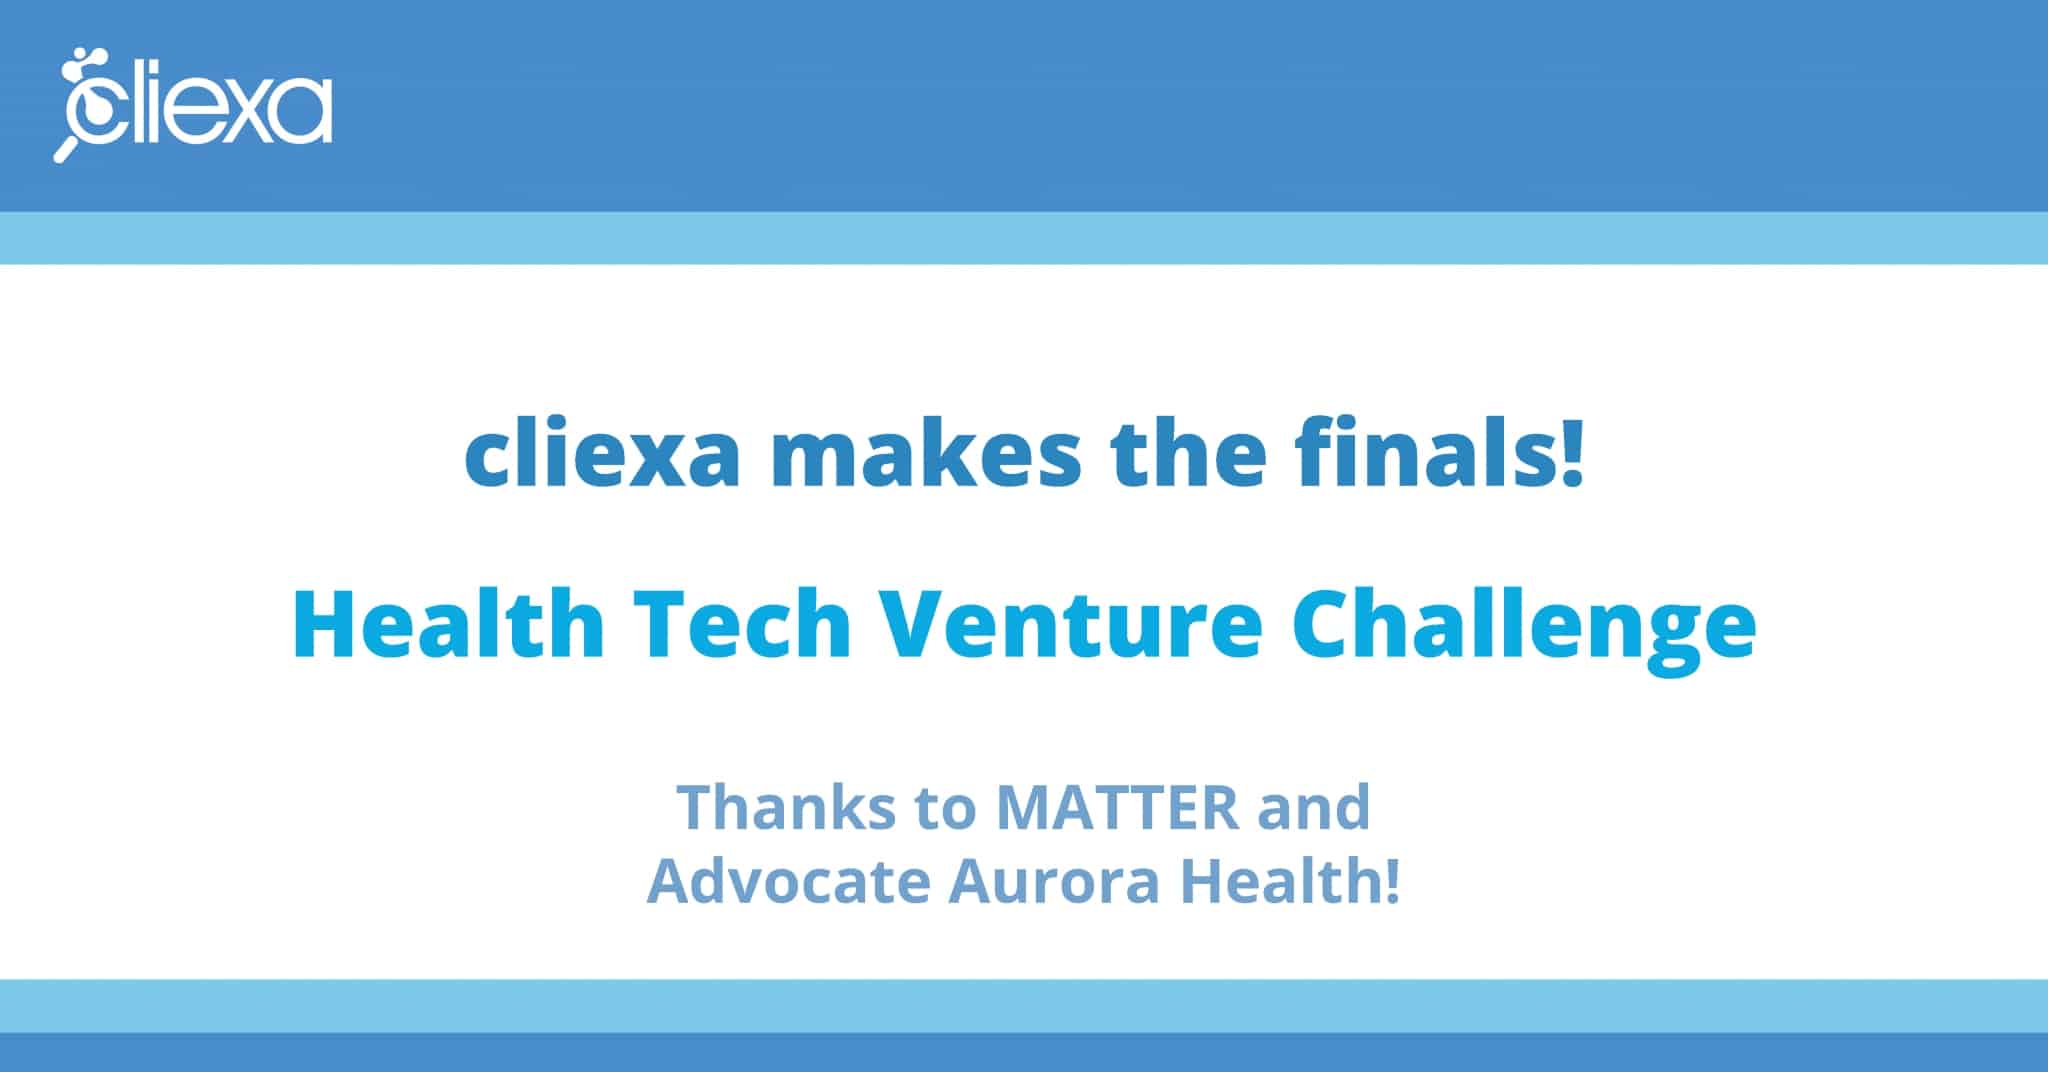 cliexa is a finalist for the Health Tech Venture Challenge